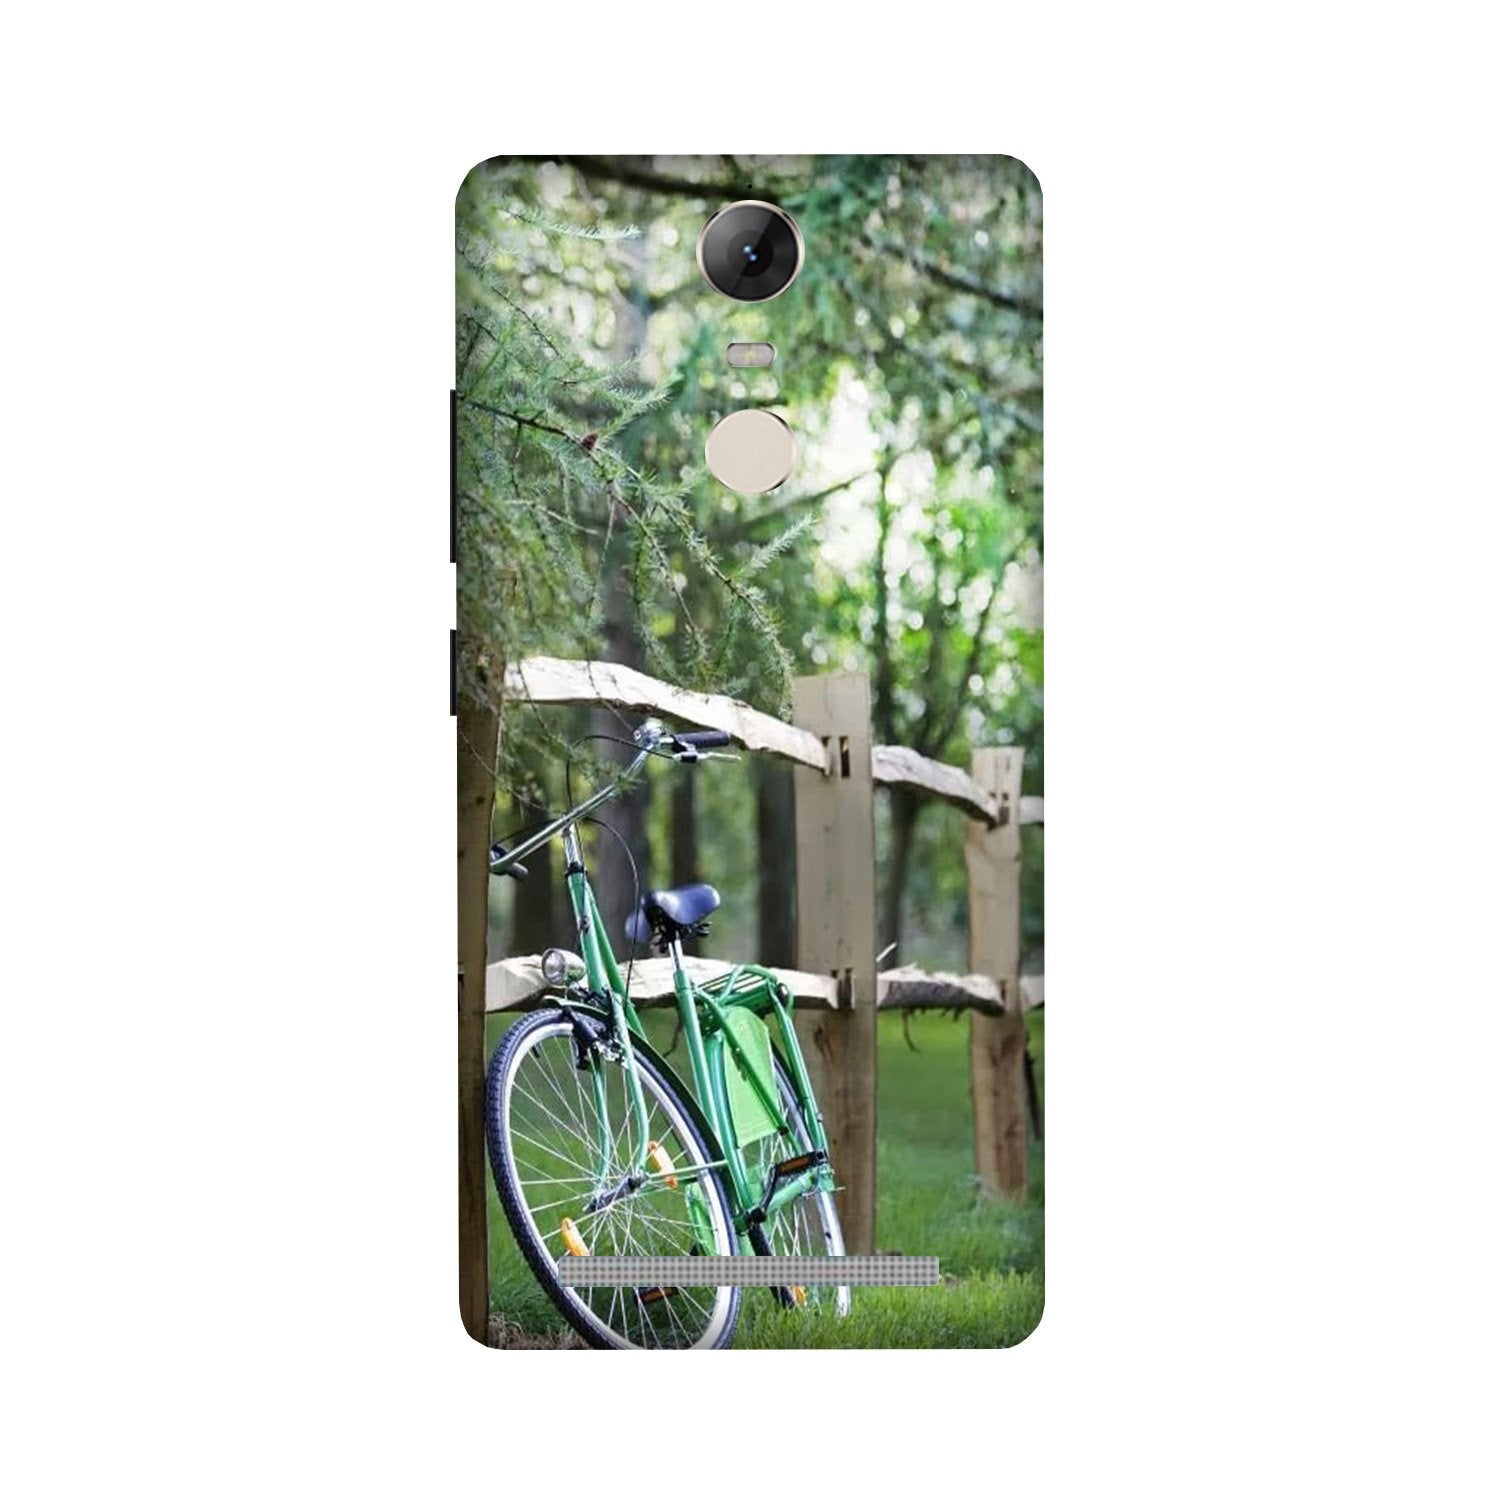 Bicycle Case for Lenovo Vibe K5 Note (Design No. 208)